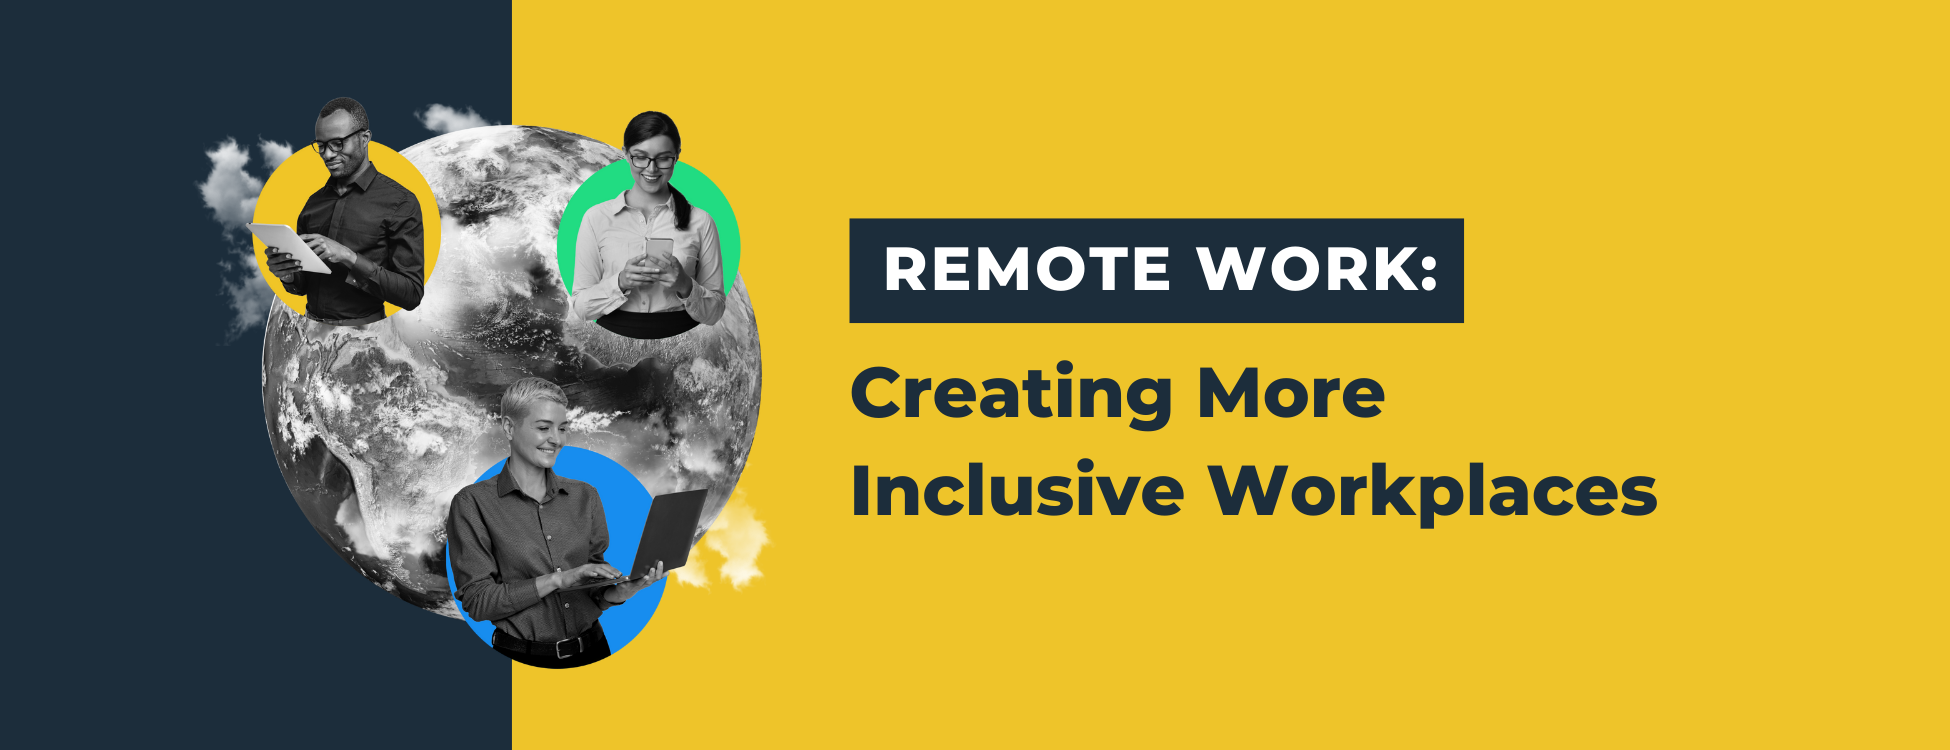 Remote Work: Creating More Inclusive Workplaces